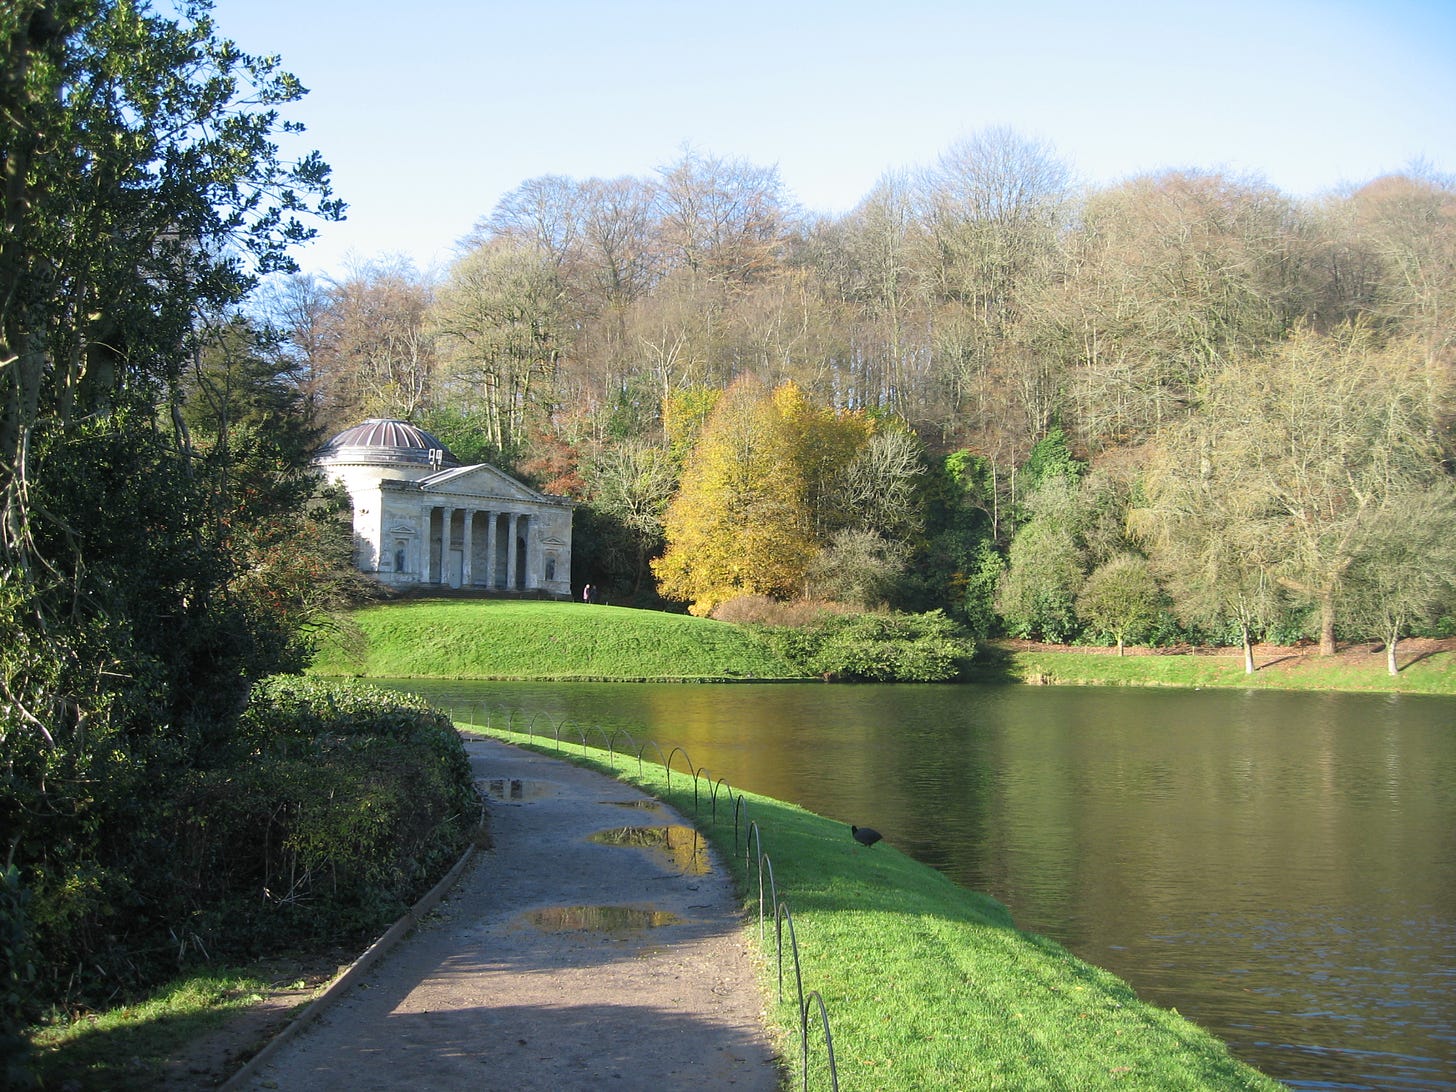 A temple in Stourhead Garden, Wiltshire. National Trust.